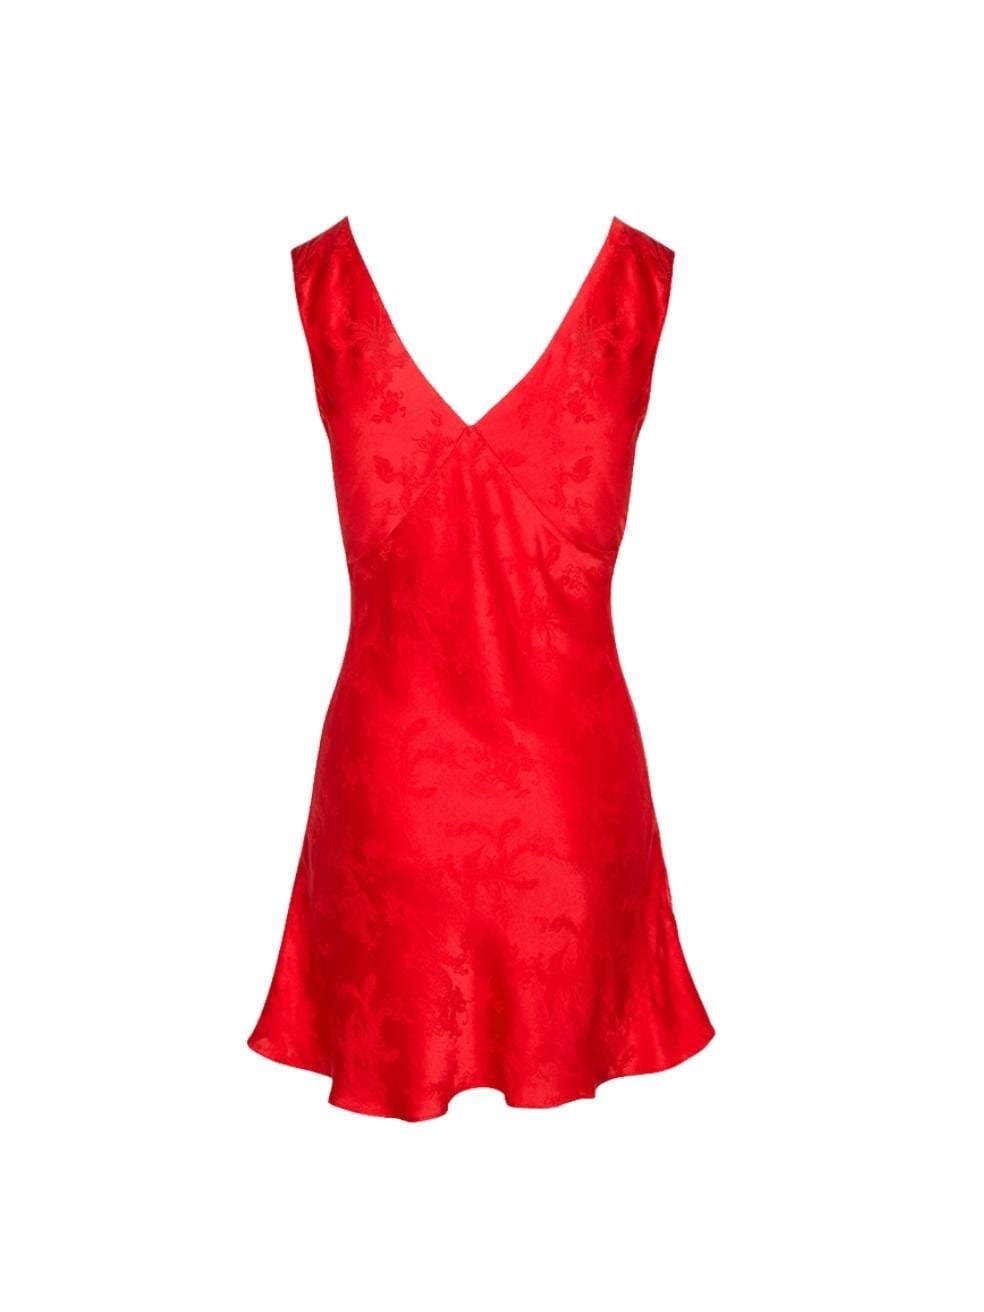 The Roxy Dress in Red